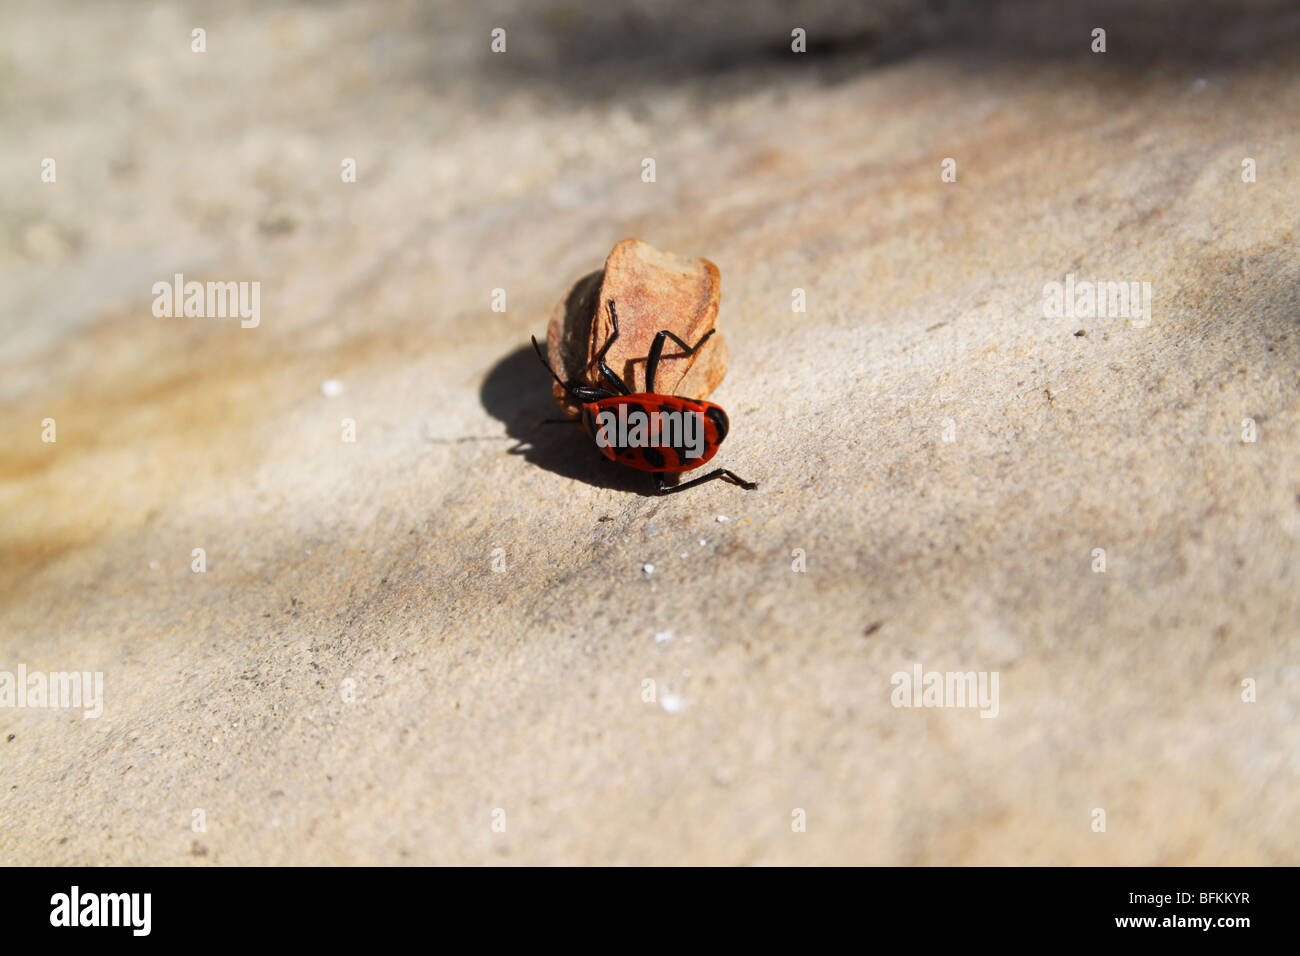 Gendarme or firebug often seen mating or eating plant seeds, Lascours, Languedoc, France Stock Photo